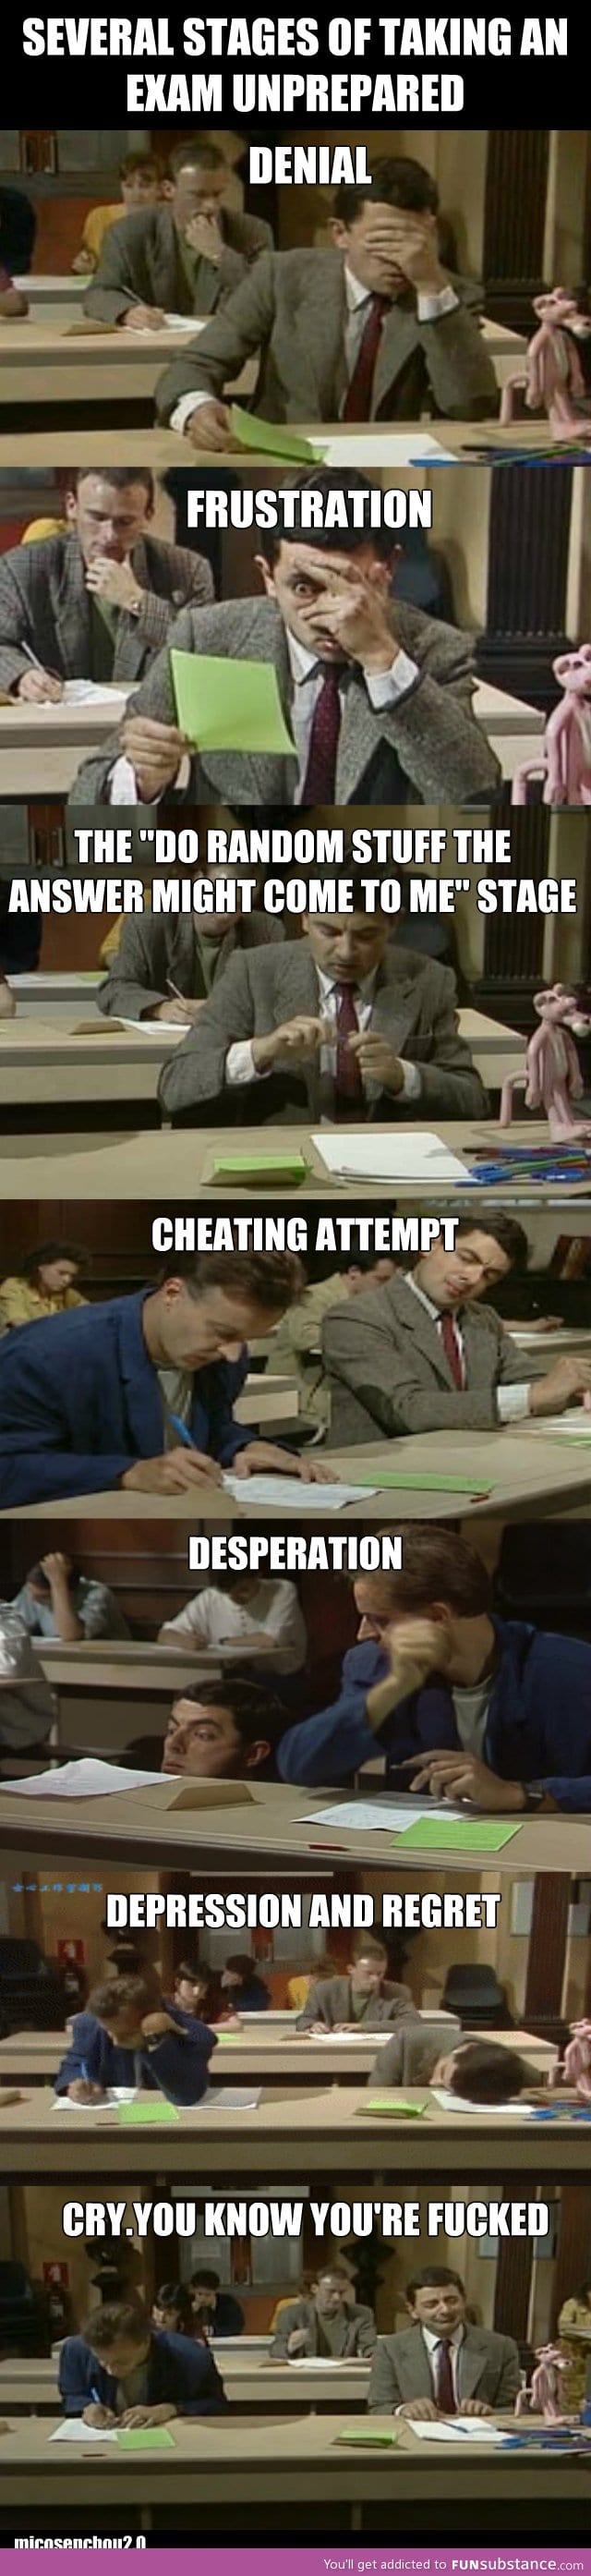 The several stages of taking an exam unprepared